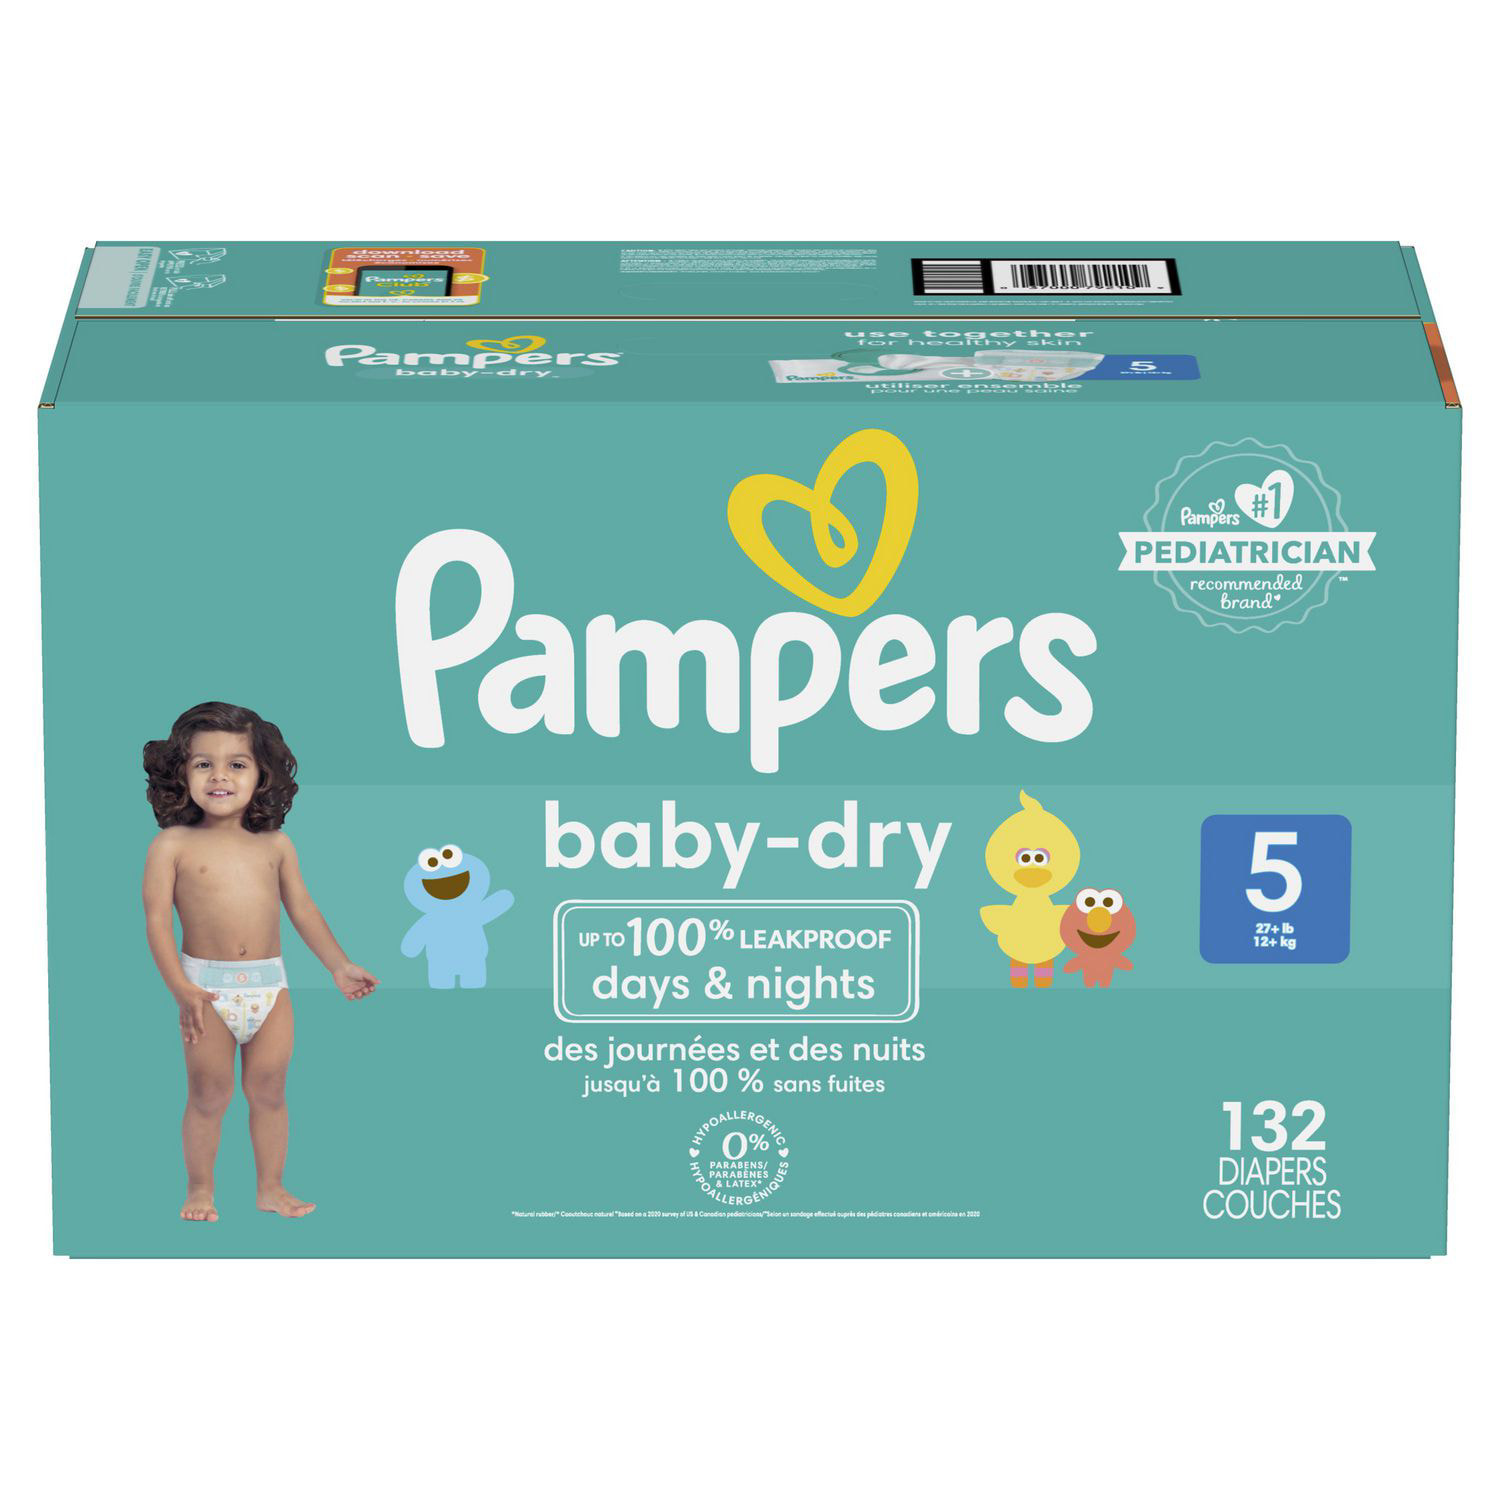 Buy Pampers Medium Size Diaper Pants for Unisex Baby(2 Count